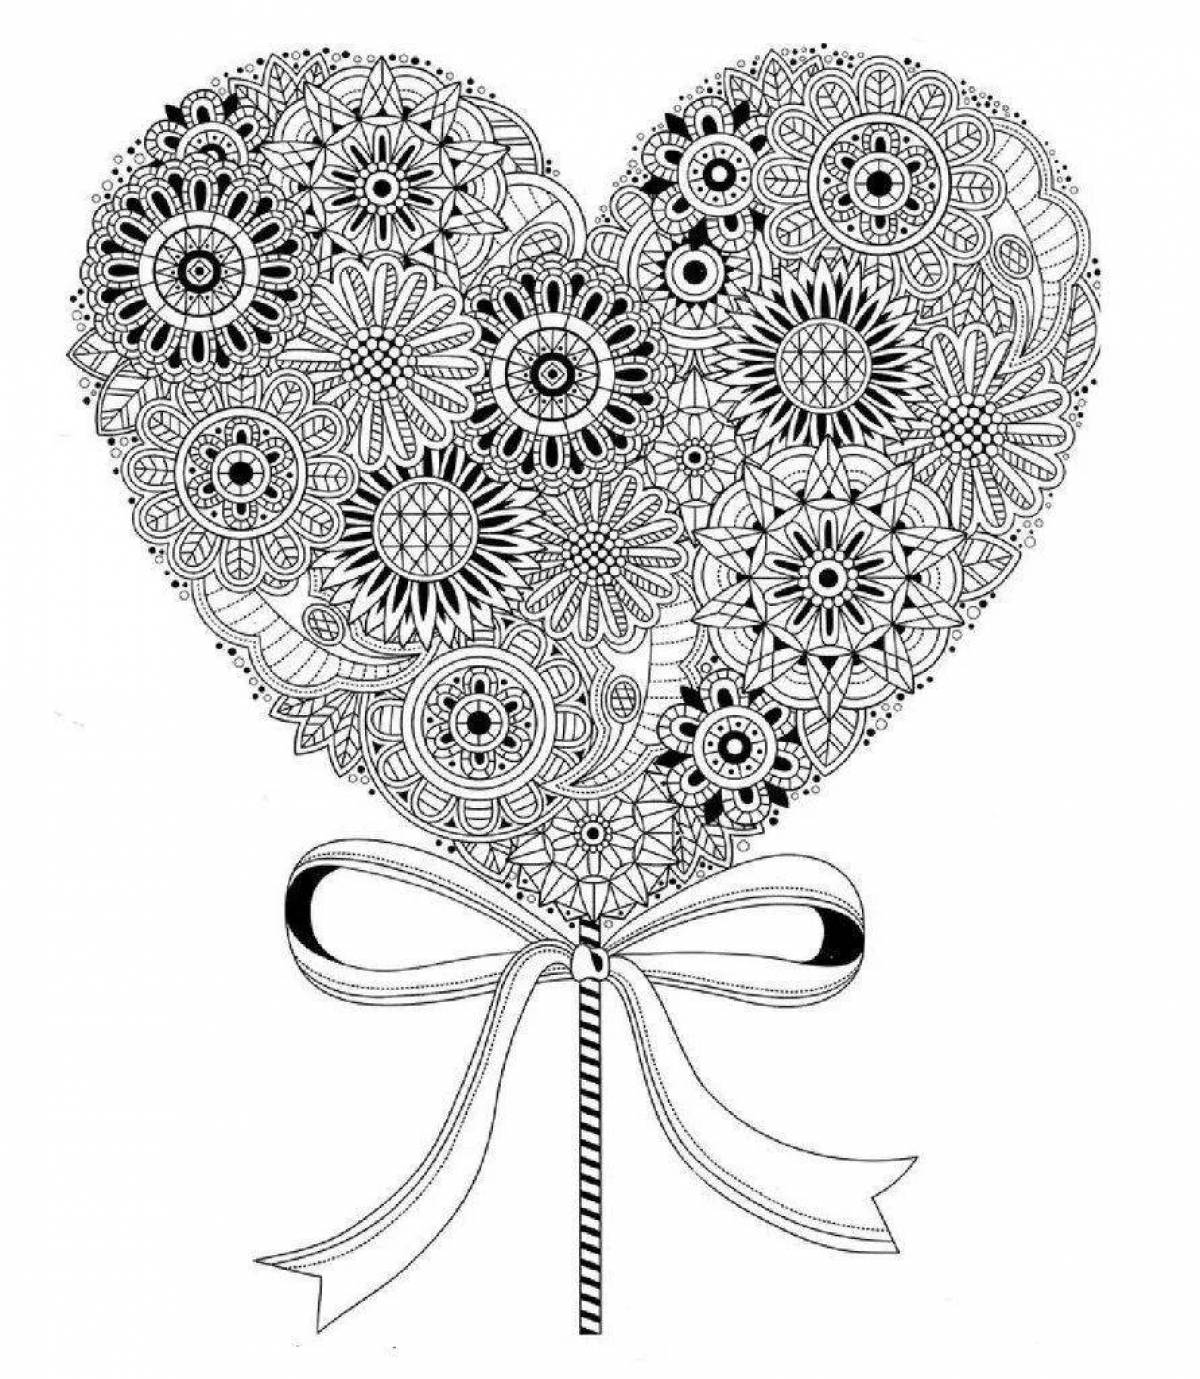 Gorgeous intricate heart coloring page